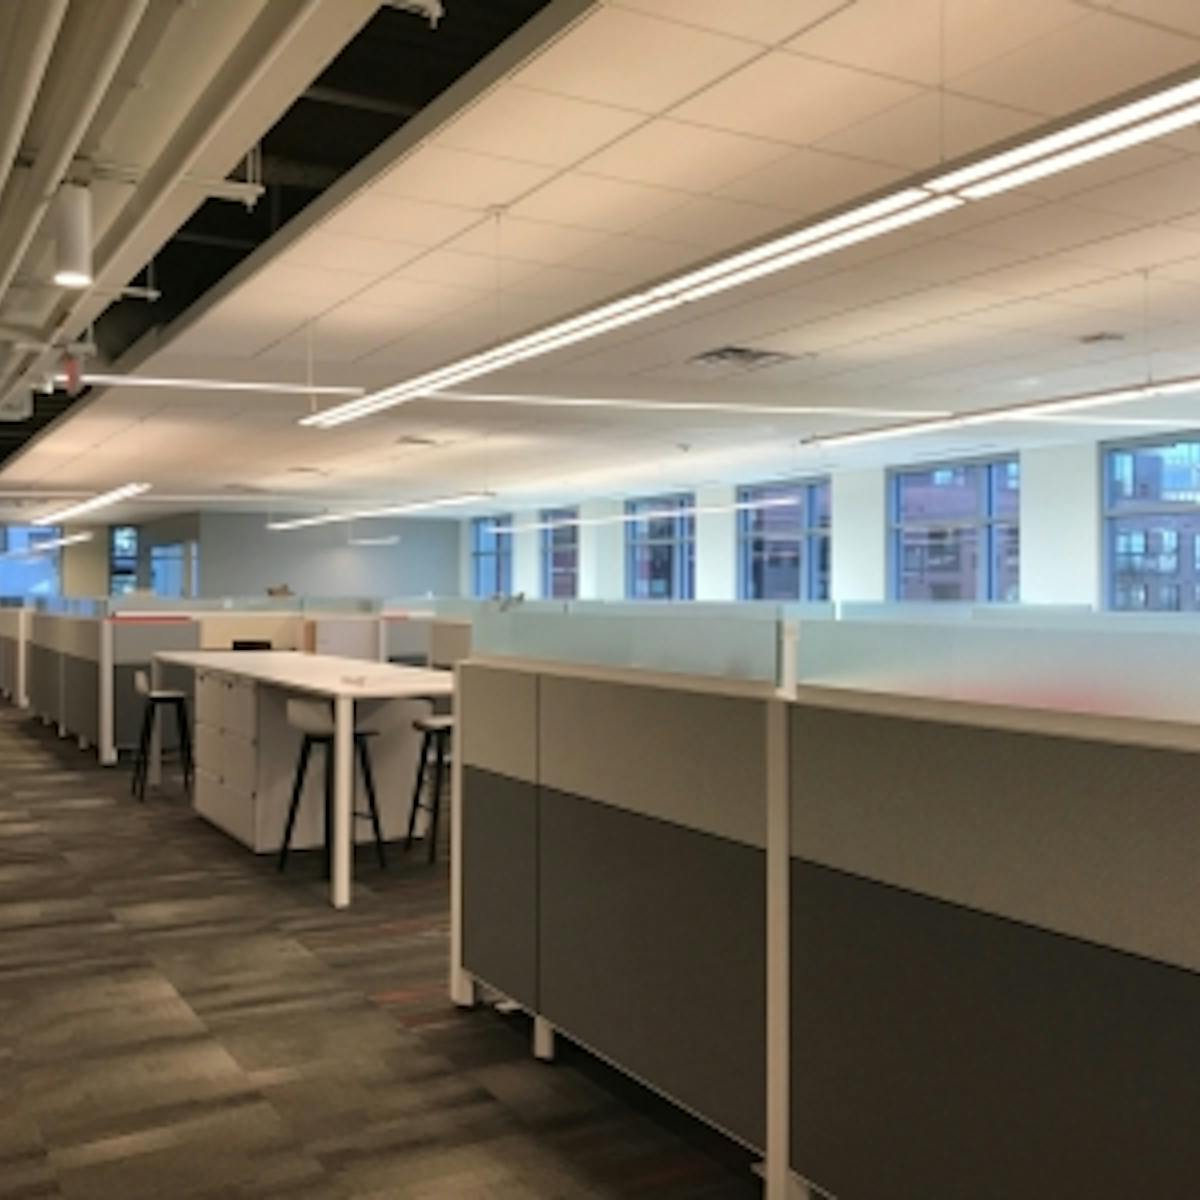 Kraus-Anderson&apos;s VP of information technology, Mike Benz, pointed out that the headquarters&apos; open ceiling architecture makes the discreet nature of a passive optical LAN attractive.